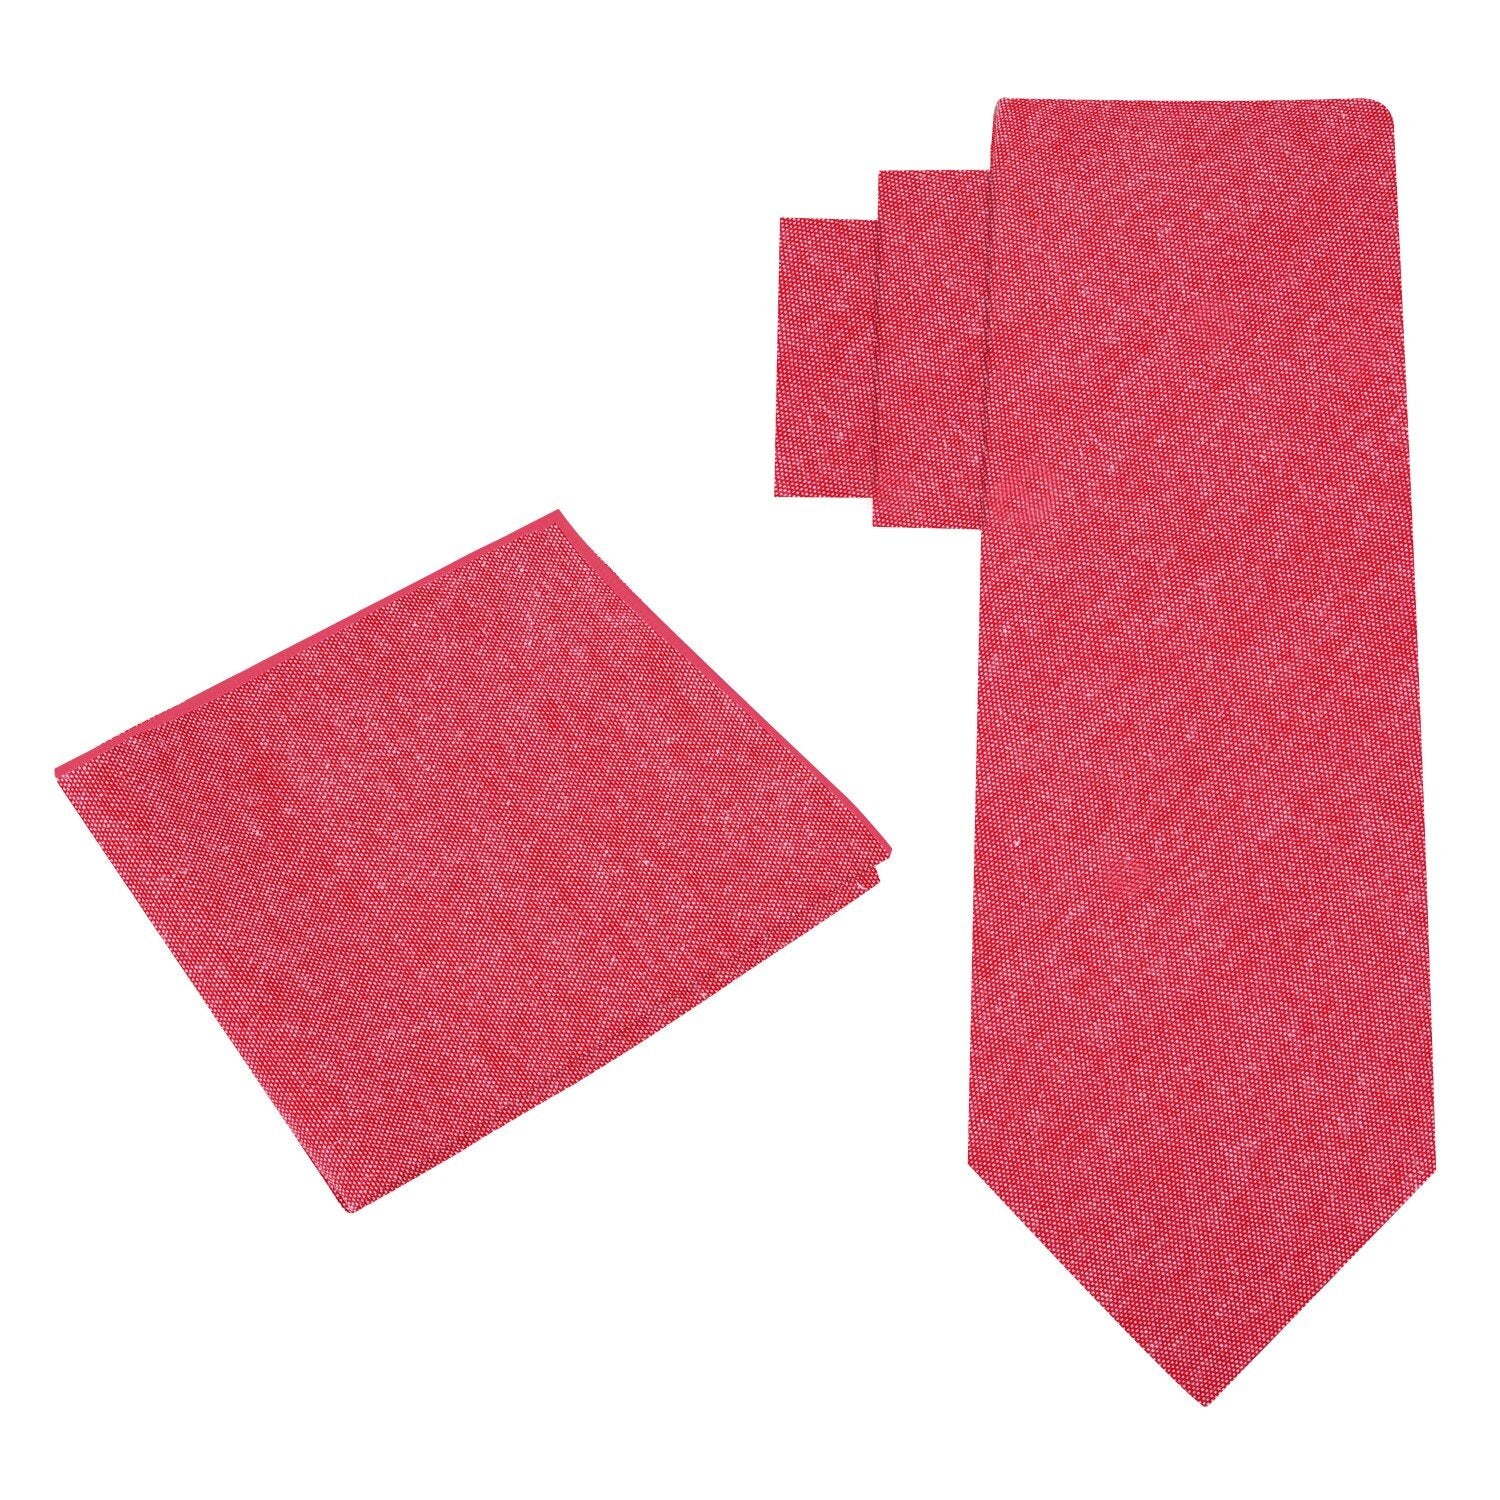 Alt View: Light Red Linen Tie and Pocket Square